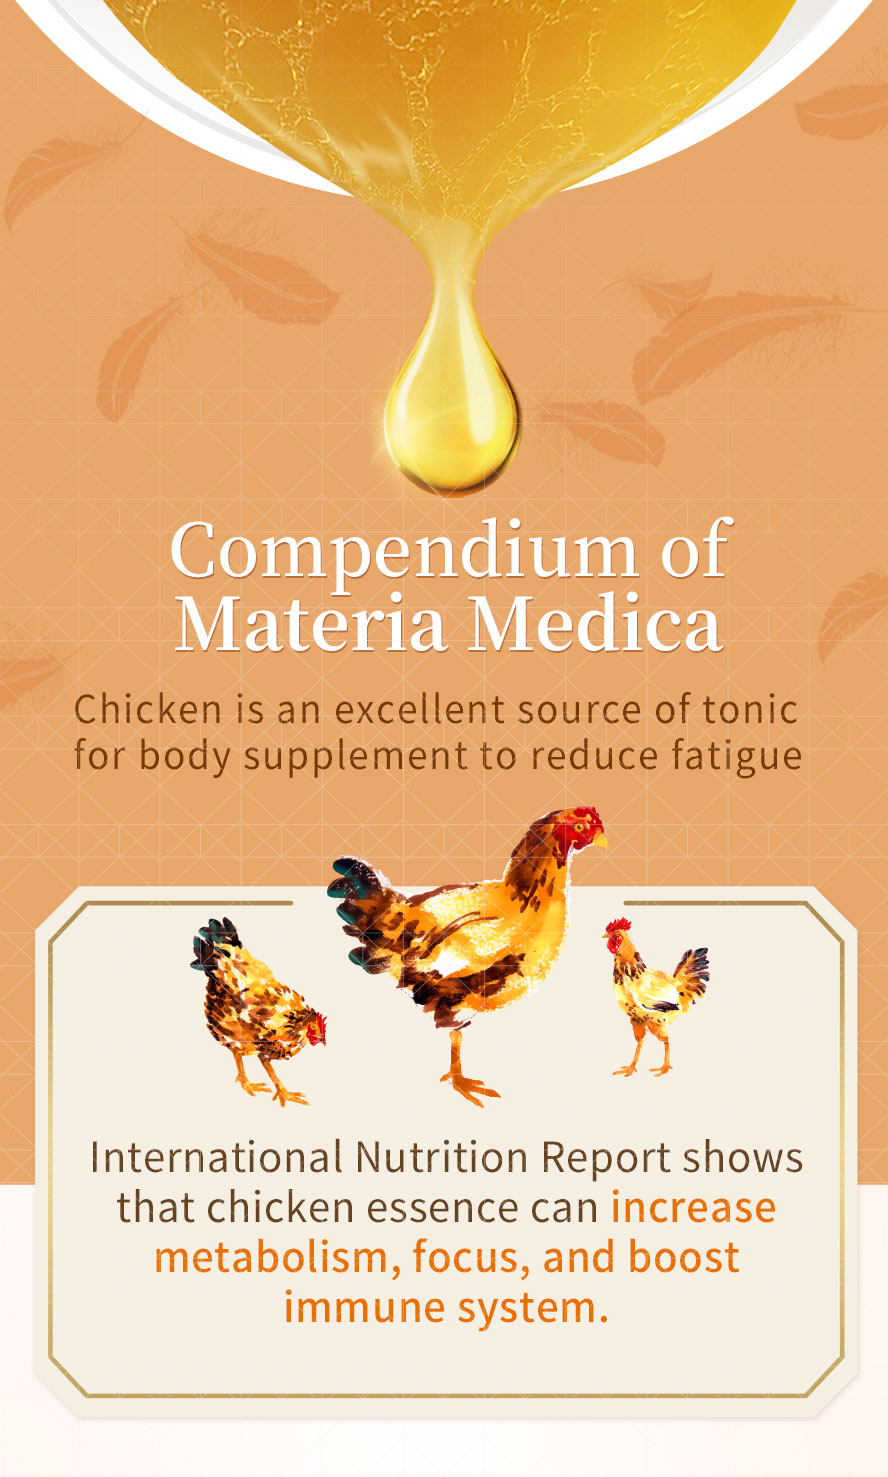 BHK essence of chicken is produced via a water extraction process from chicken for several hours under high-temperature, followed by centrifugation to remove fat and cholesterol.